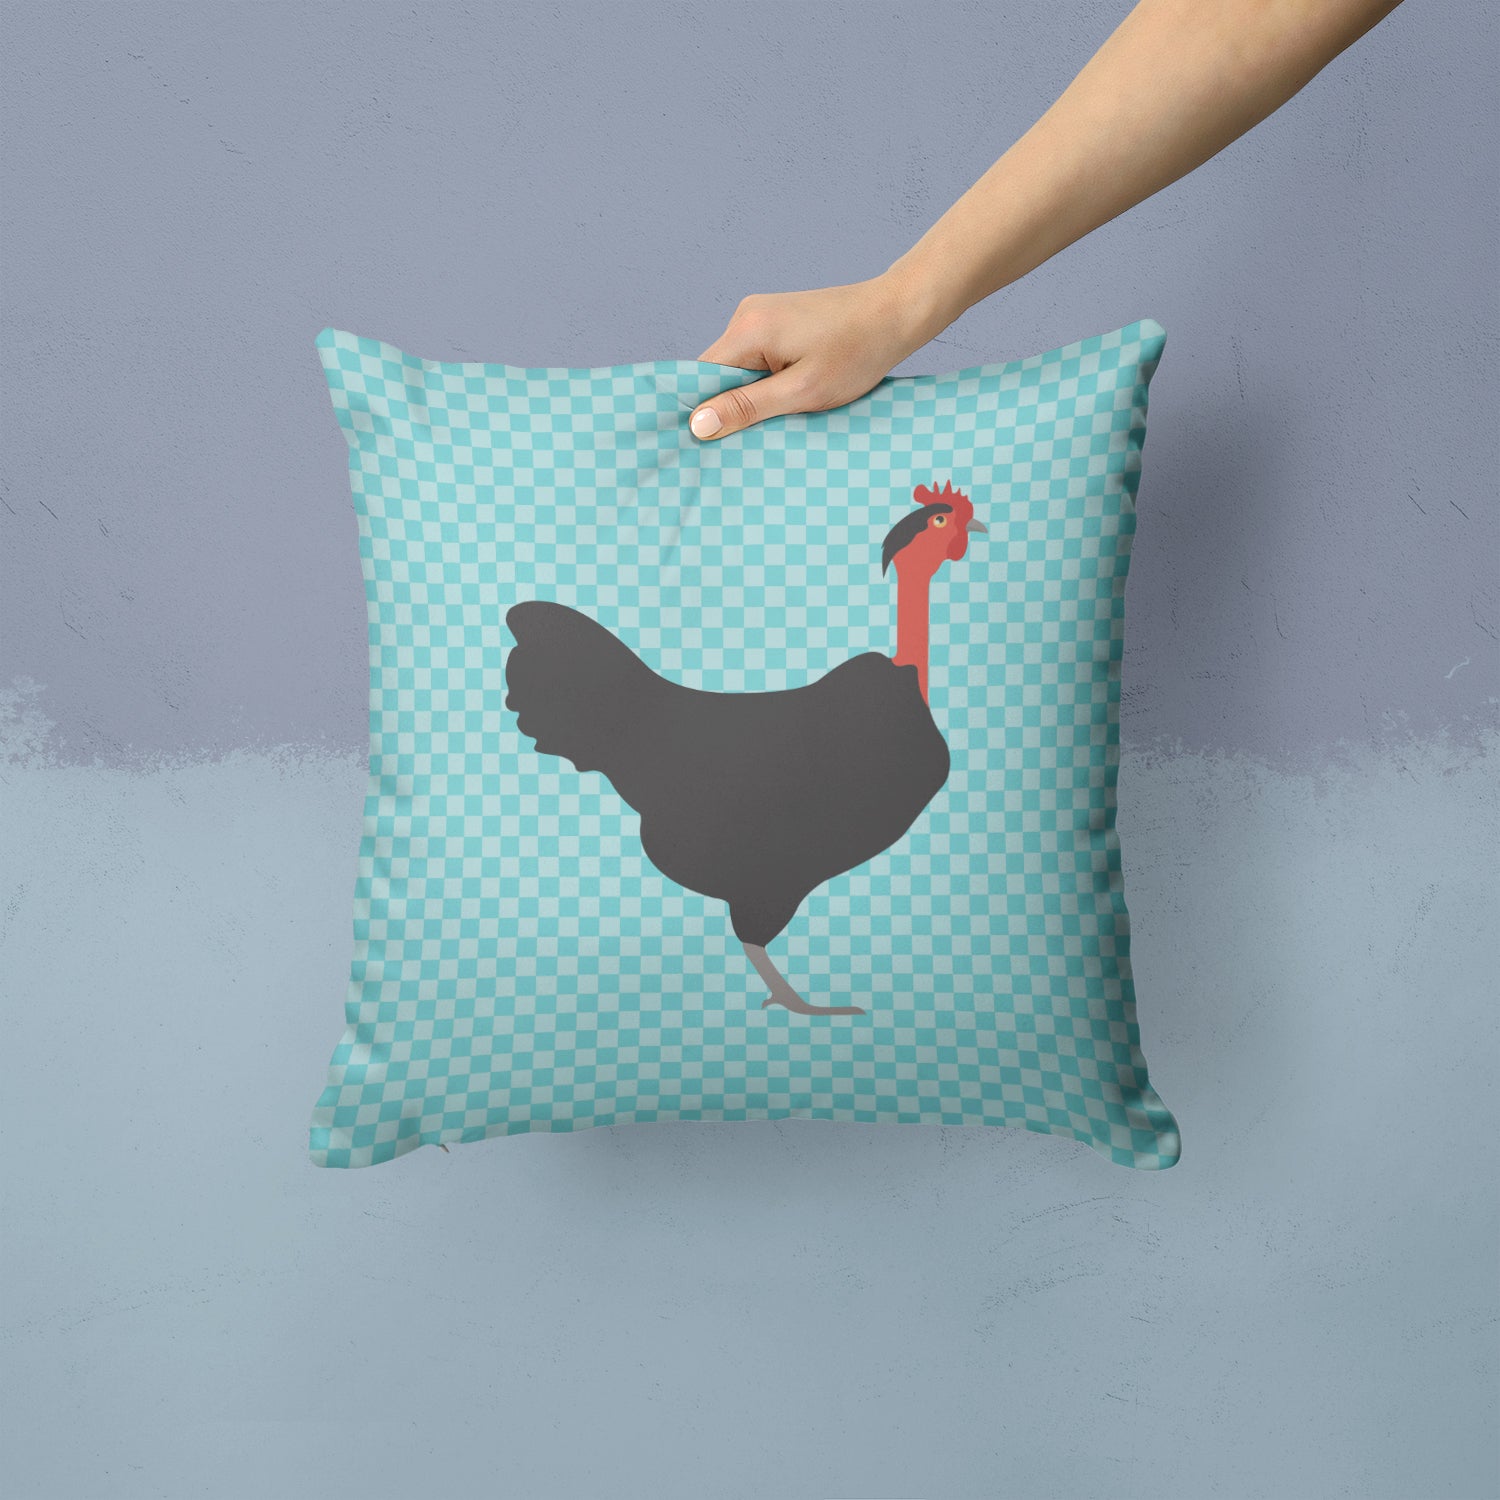 Naked Neck Chicken Blue Check Fabric Decorative Pillow BB8013PW1414 - the-store.com